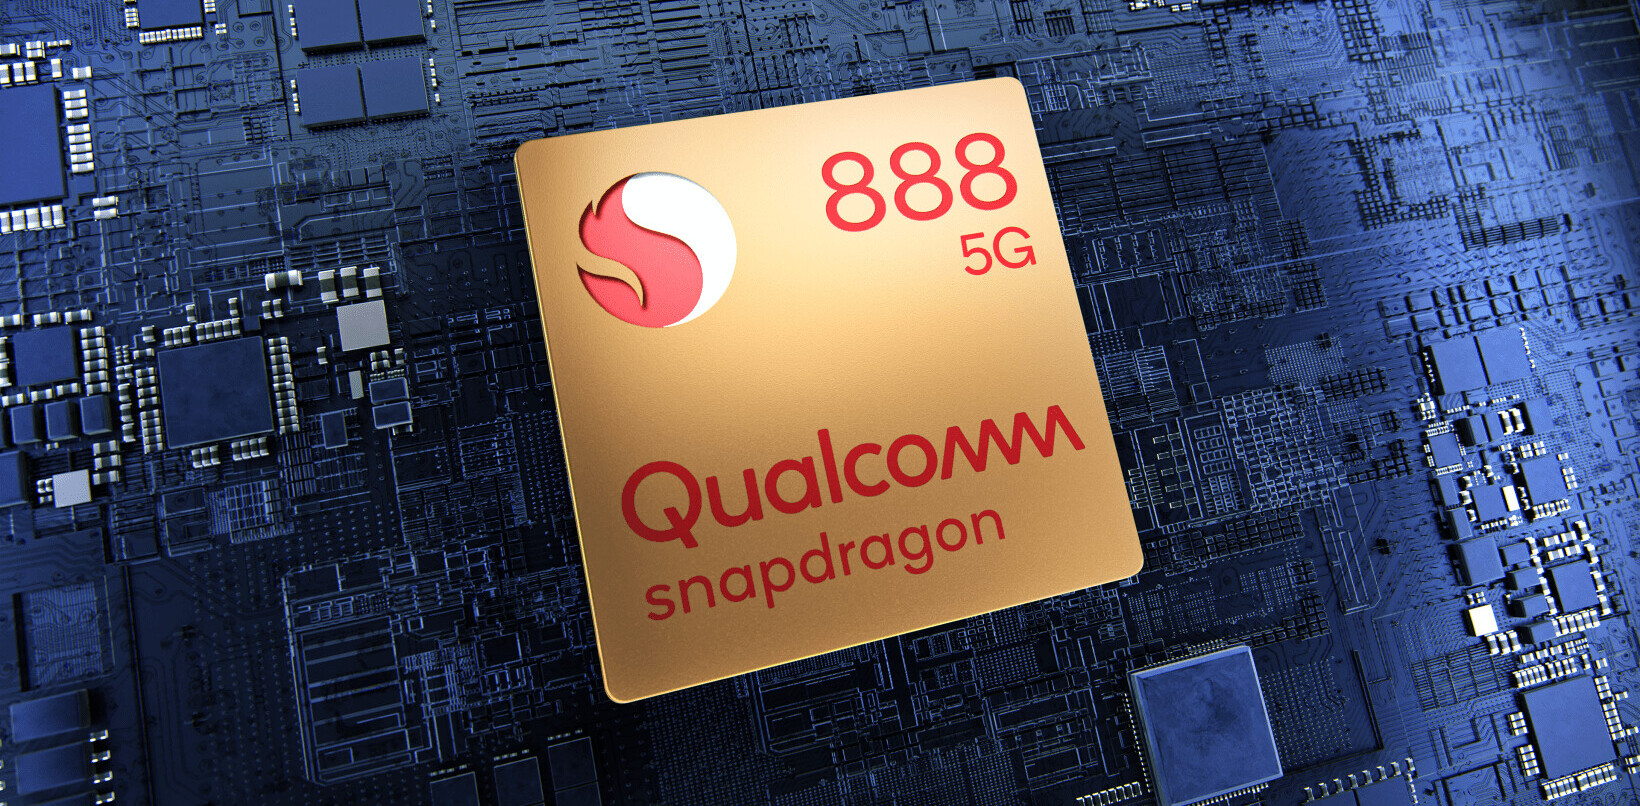 Qualcomm’s next flagship processor is the Snapdragon 888